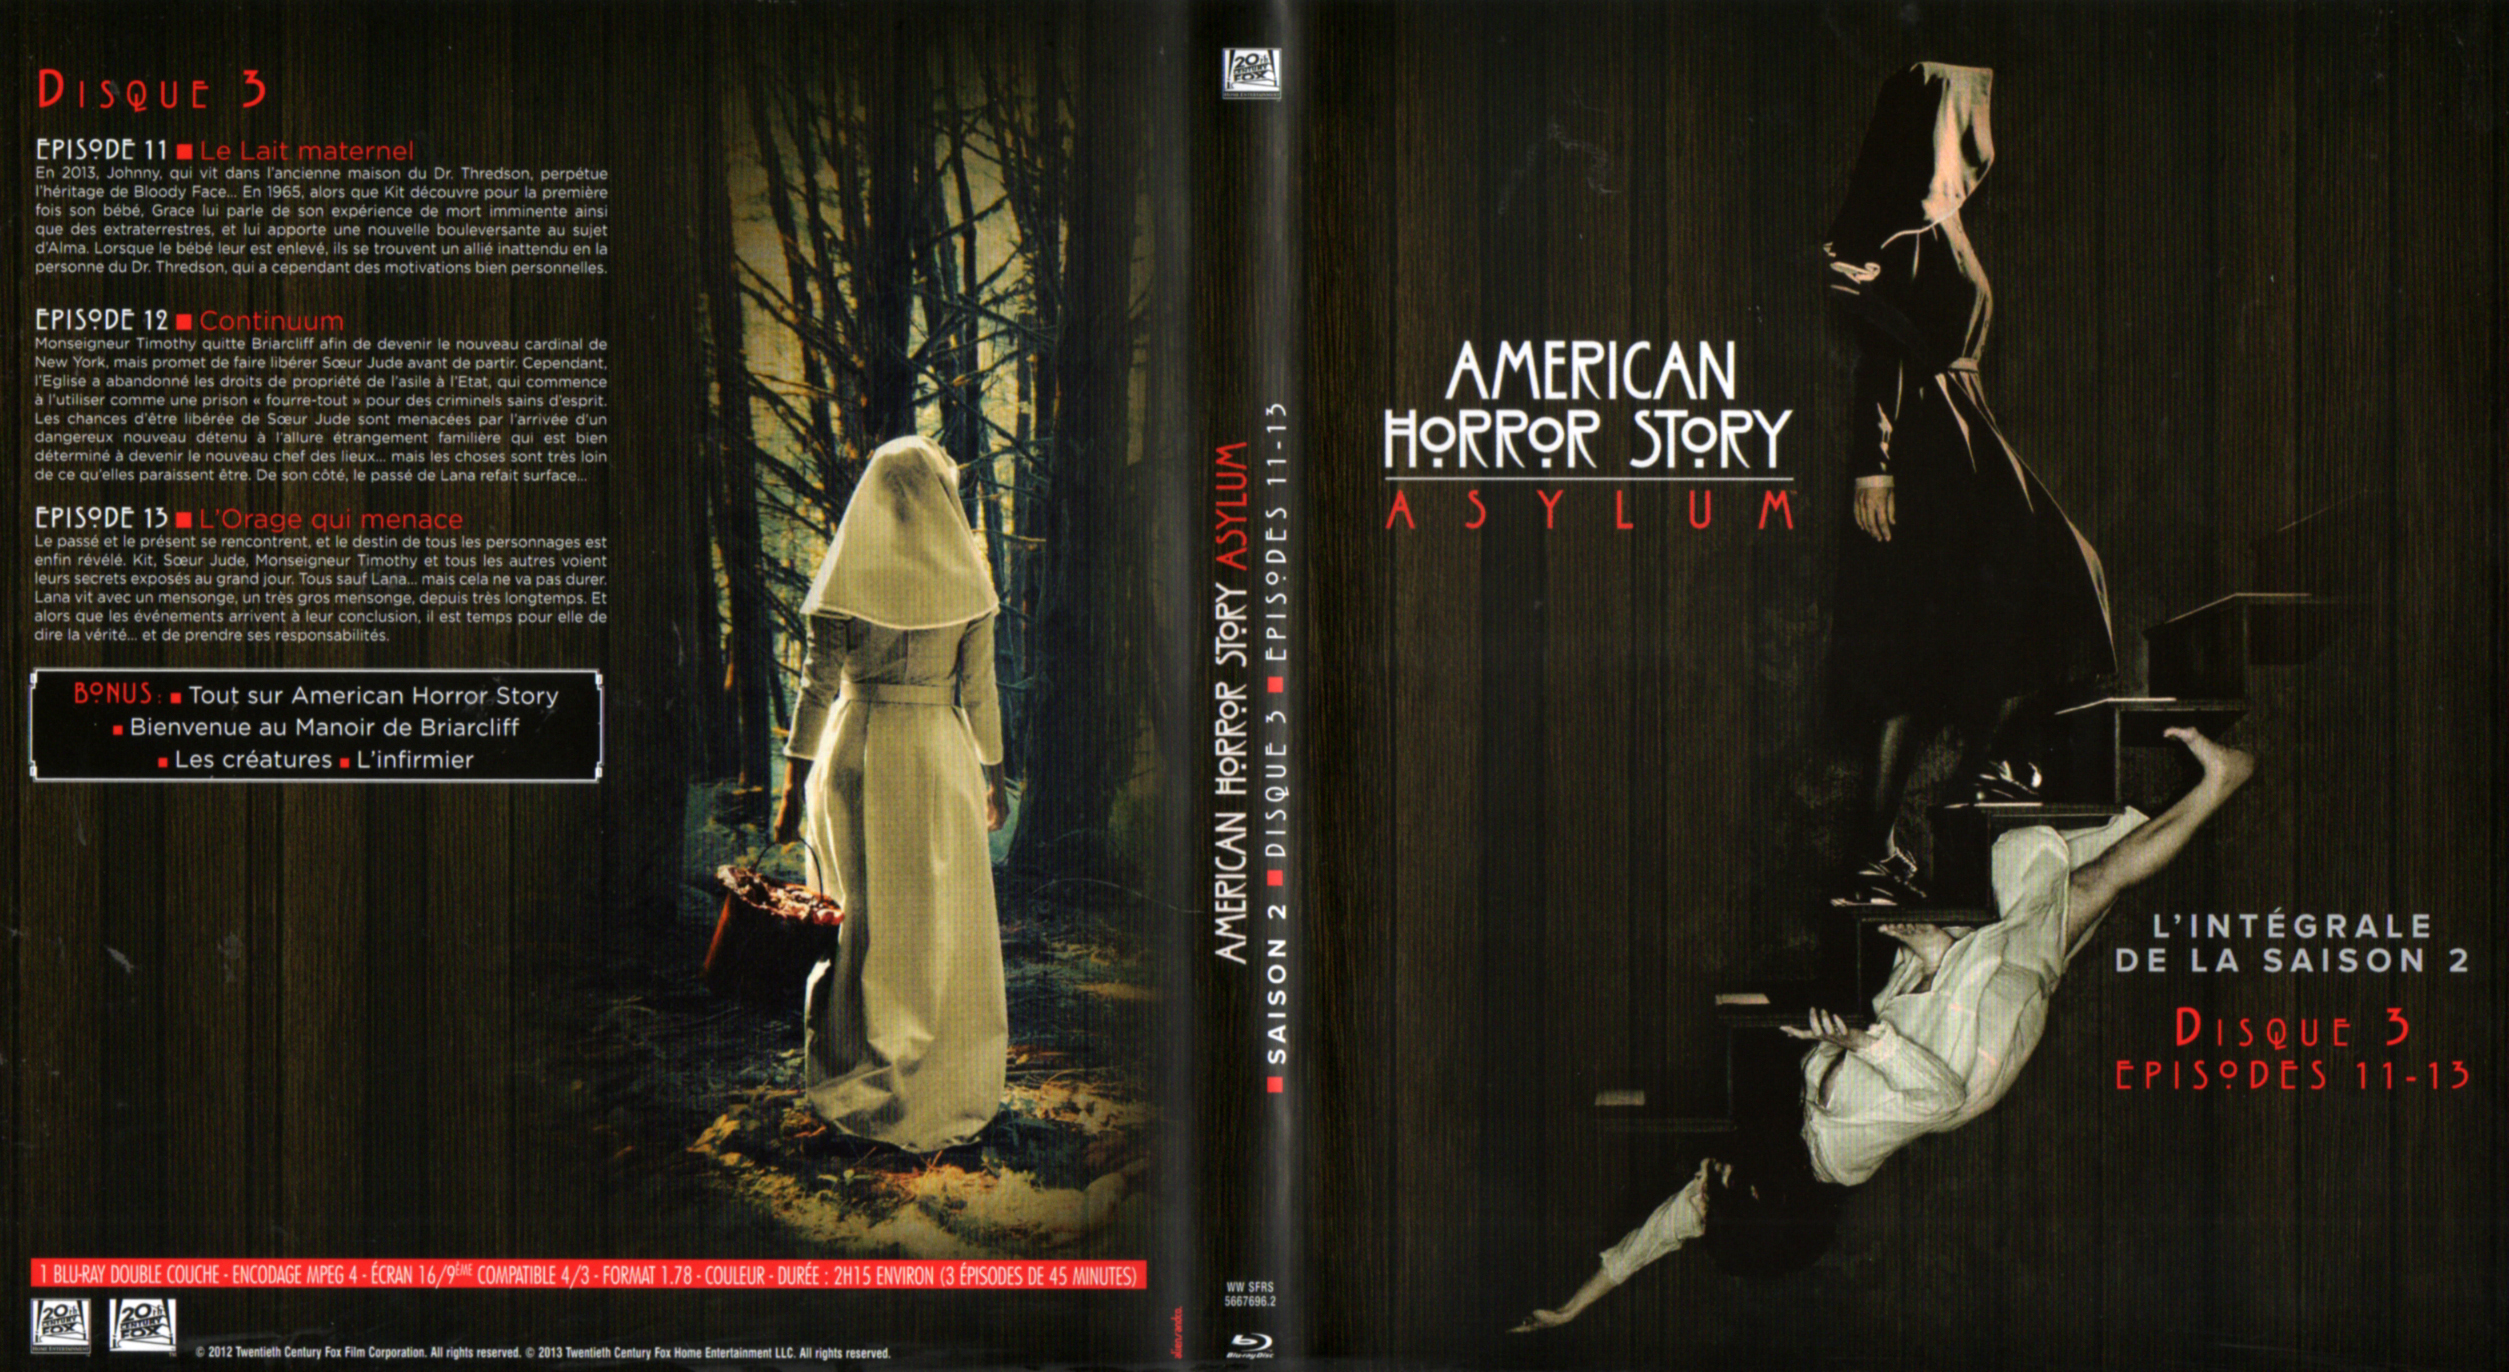 Jaquette DVD American horror story Saison 2 DISC 2 (BLU-RAY)